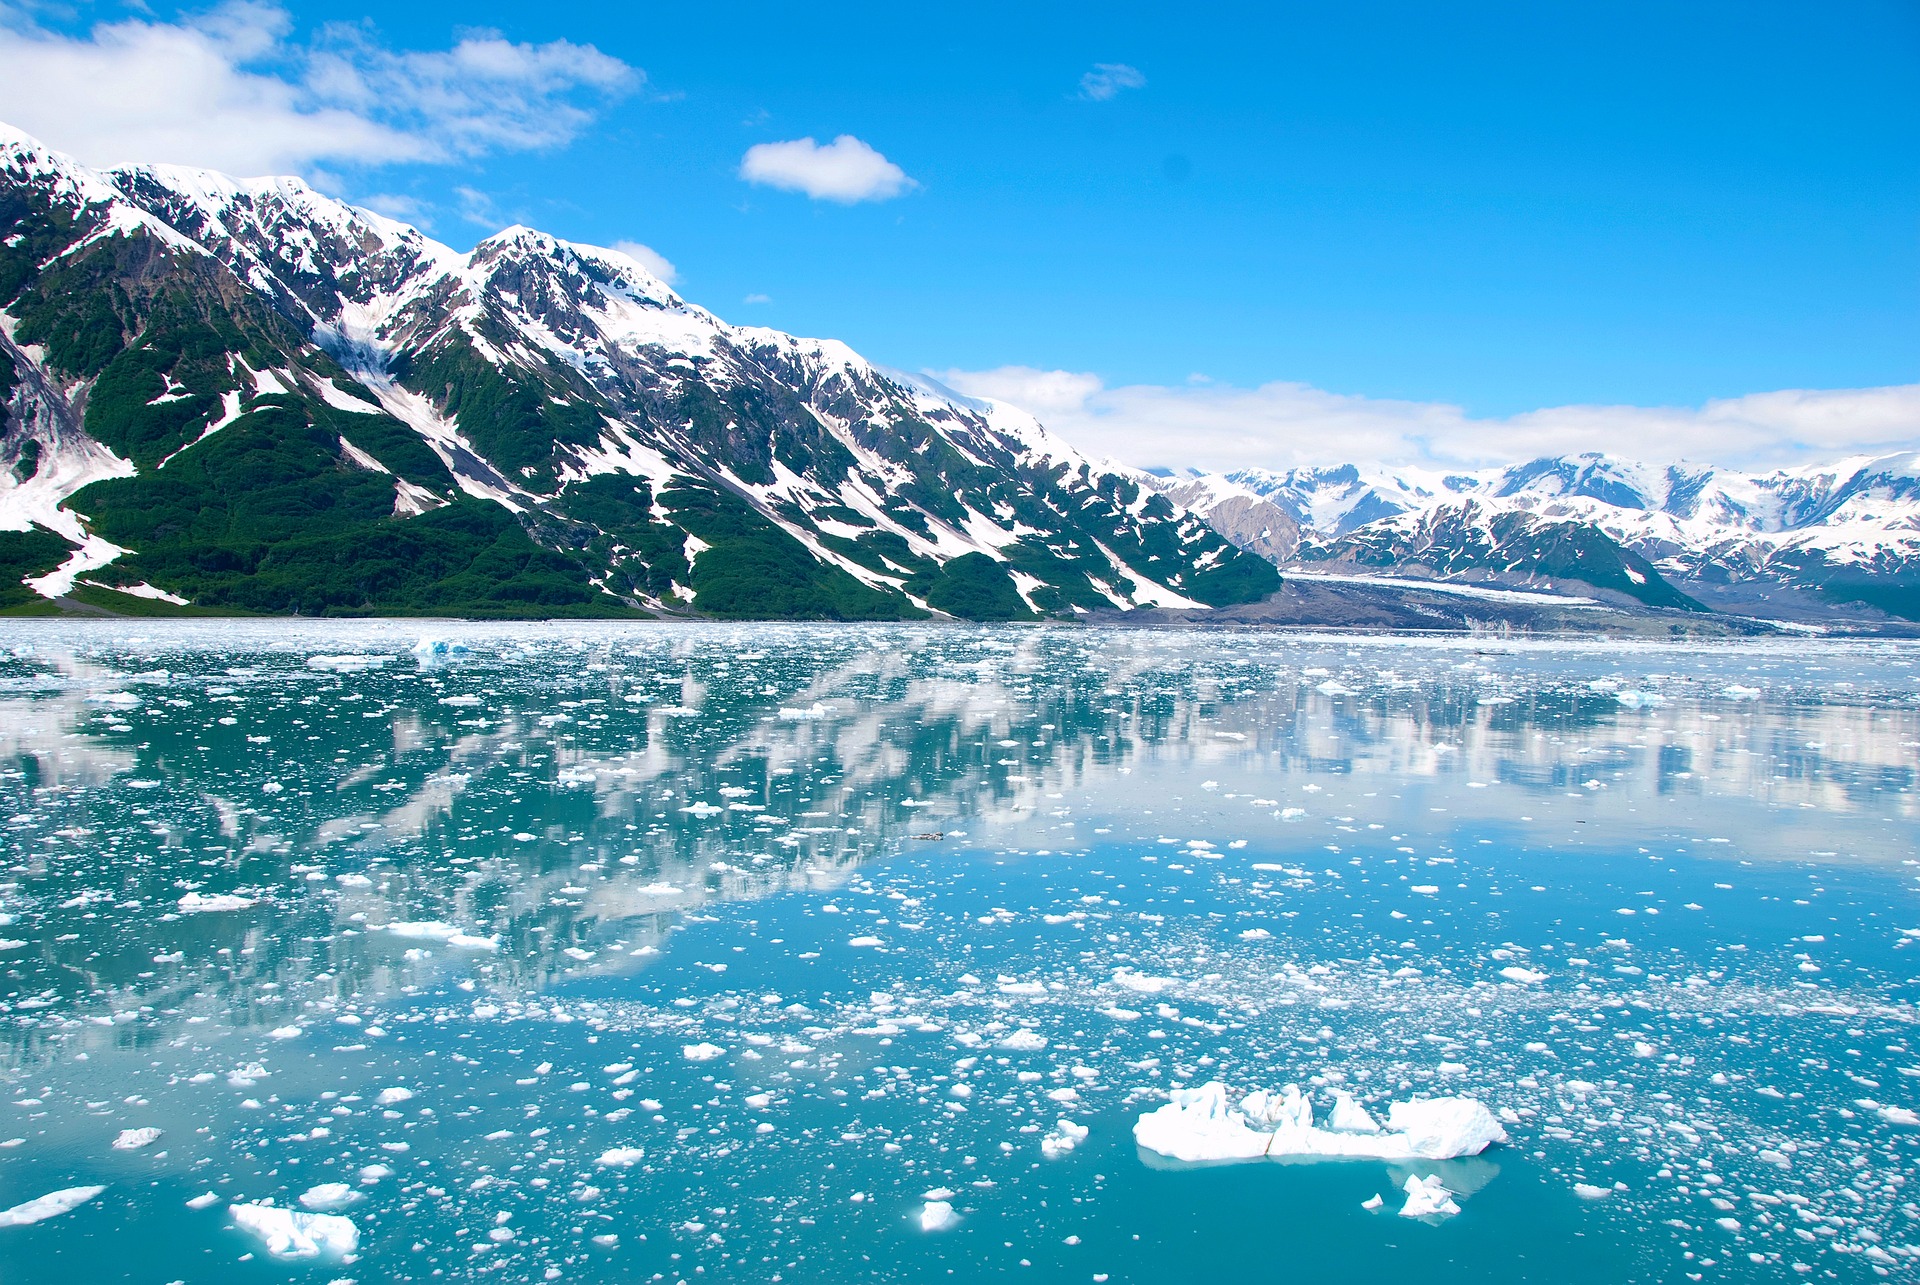 Image featuring Alaska's mountainous landscape with water reflection and a blue sky.